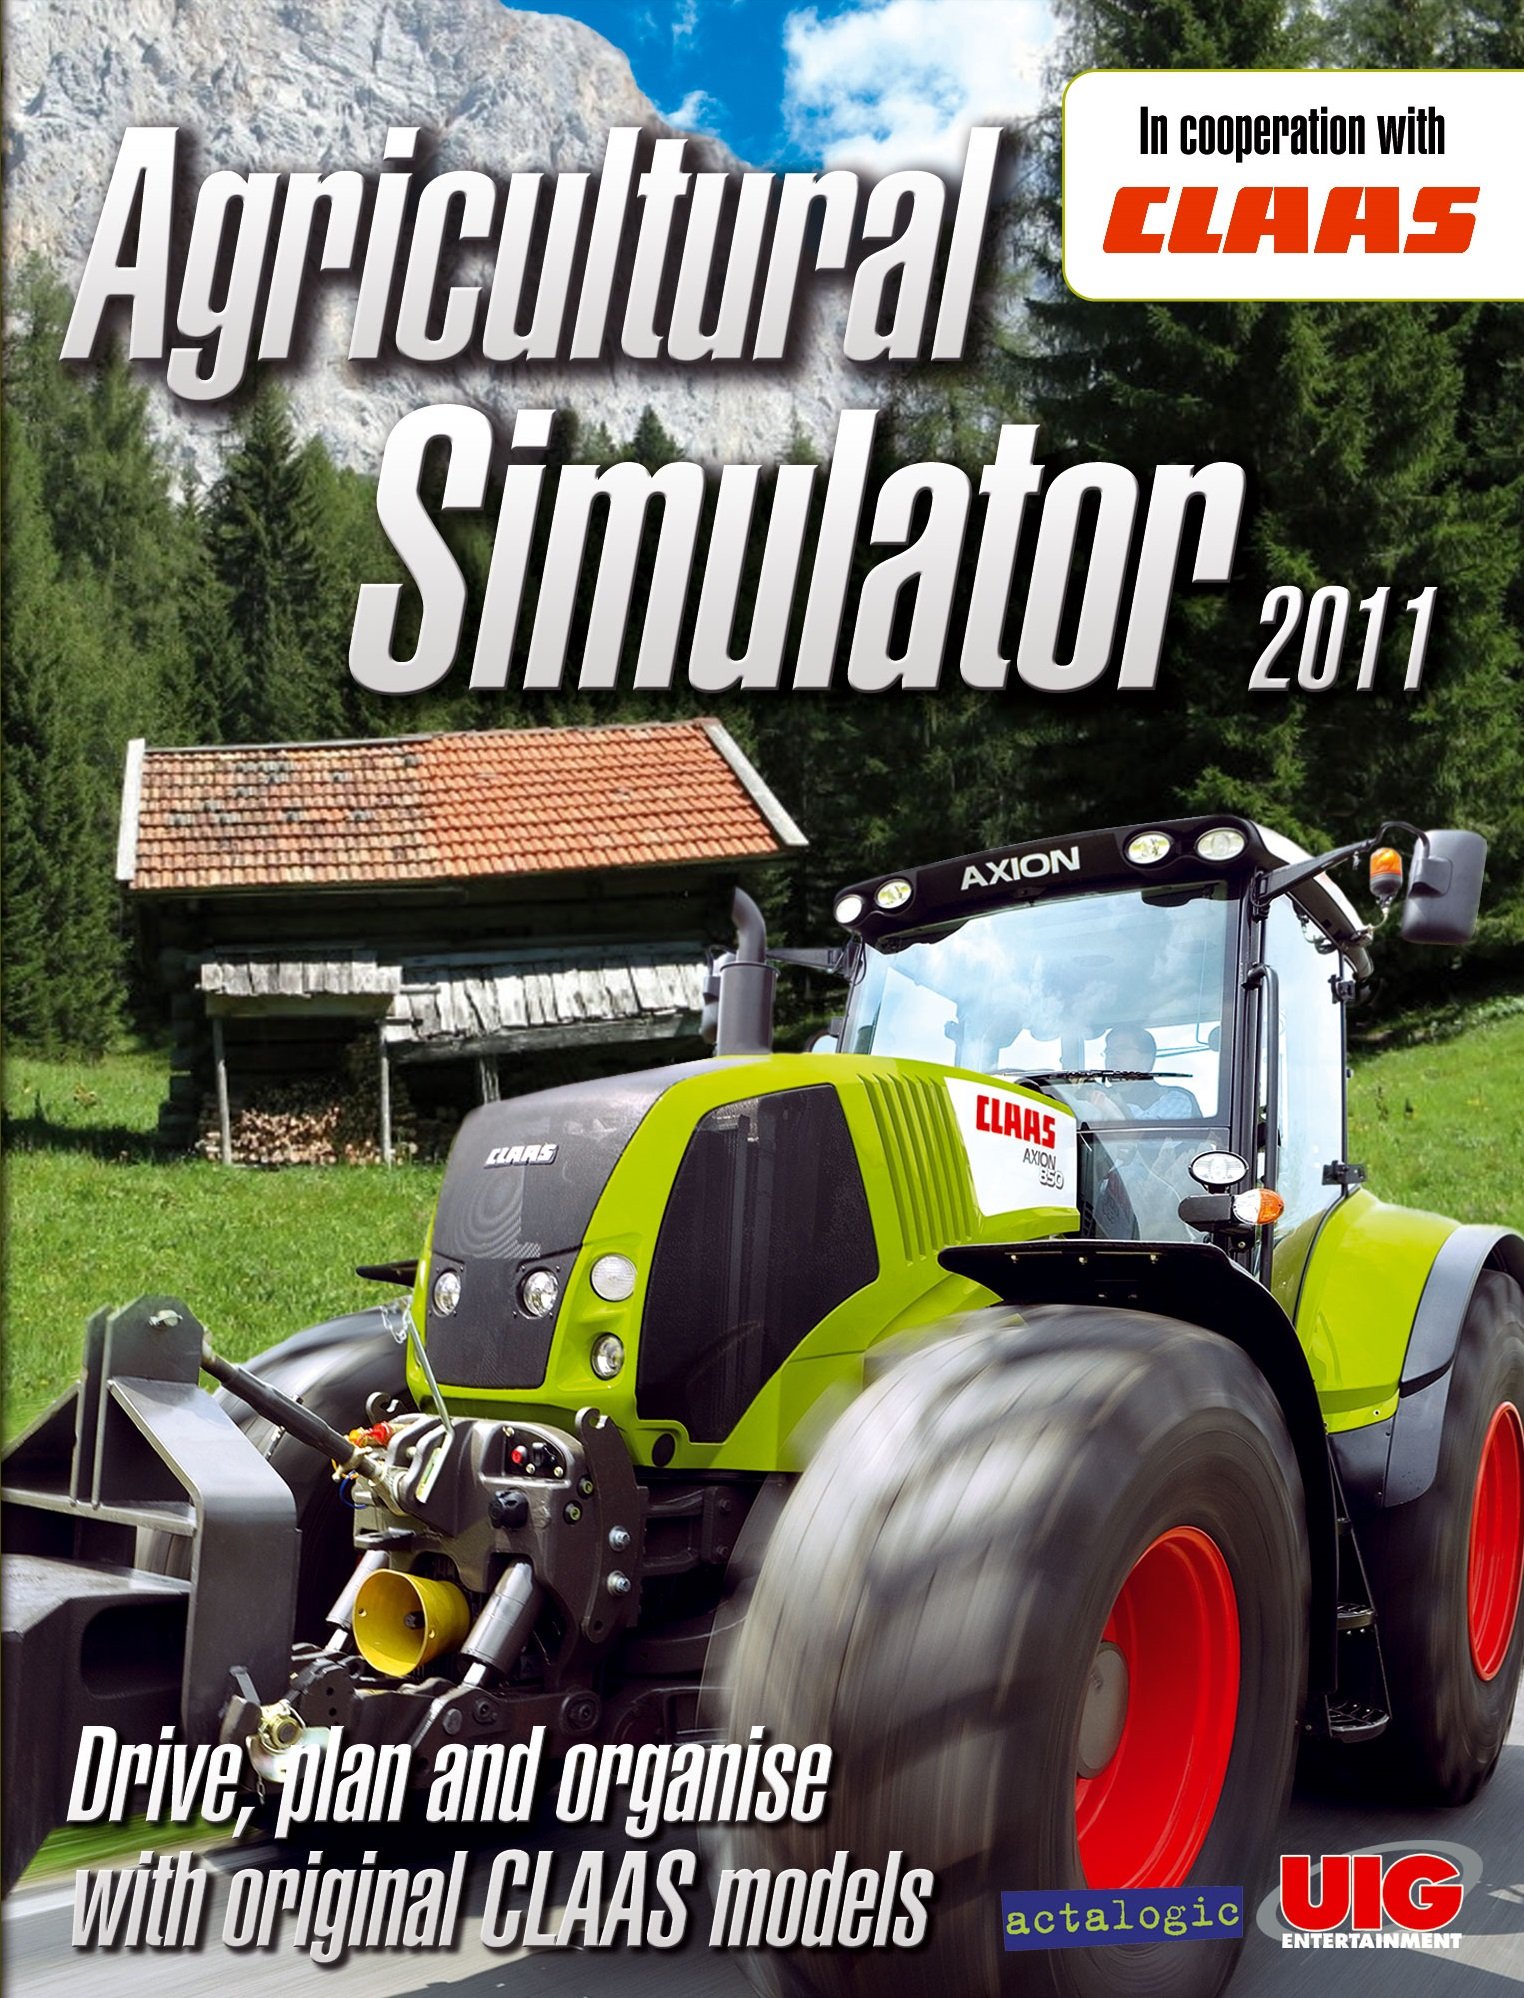 Image of Agricultural Simulator 2011